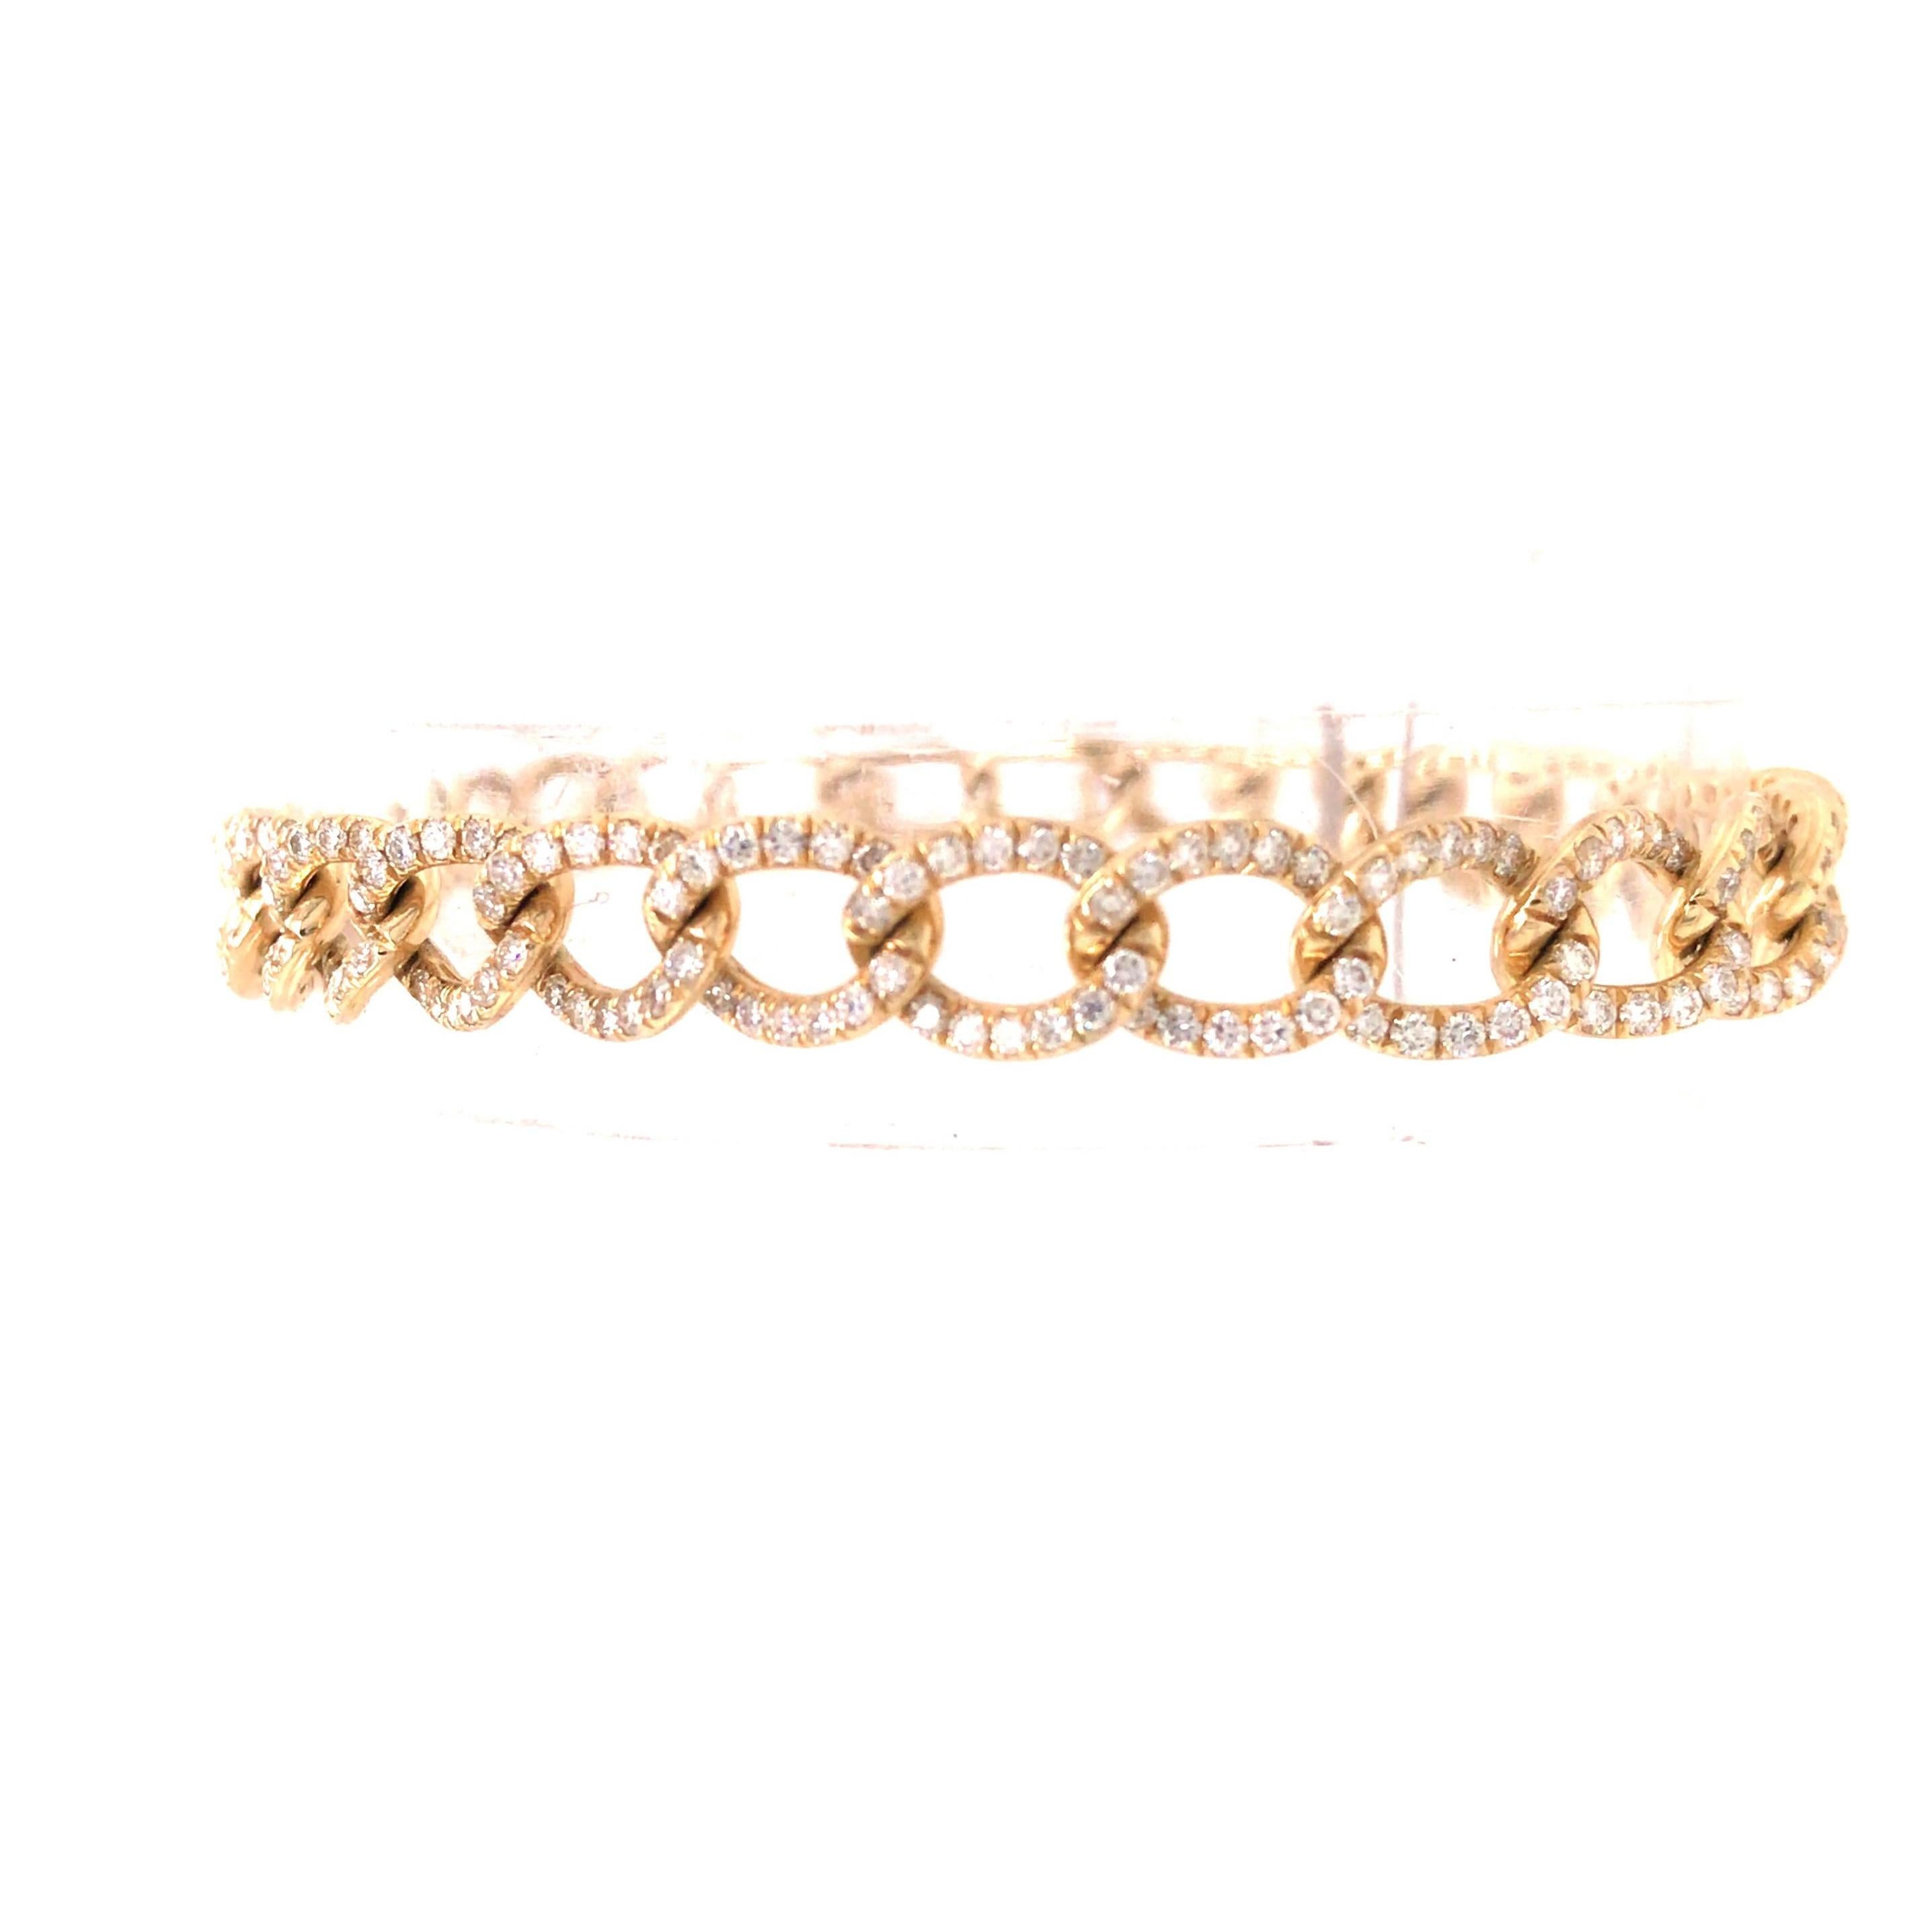 Diamond Link Bracelet in 14K Yellow Gold. Round Brilliant Cut Diamonds weighing 2.90 carat total weight G-H in color VS in clarity are expertly set. The Bracelet measures 7 inch in length and 1/4 in width. 11.60 grams.